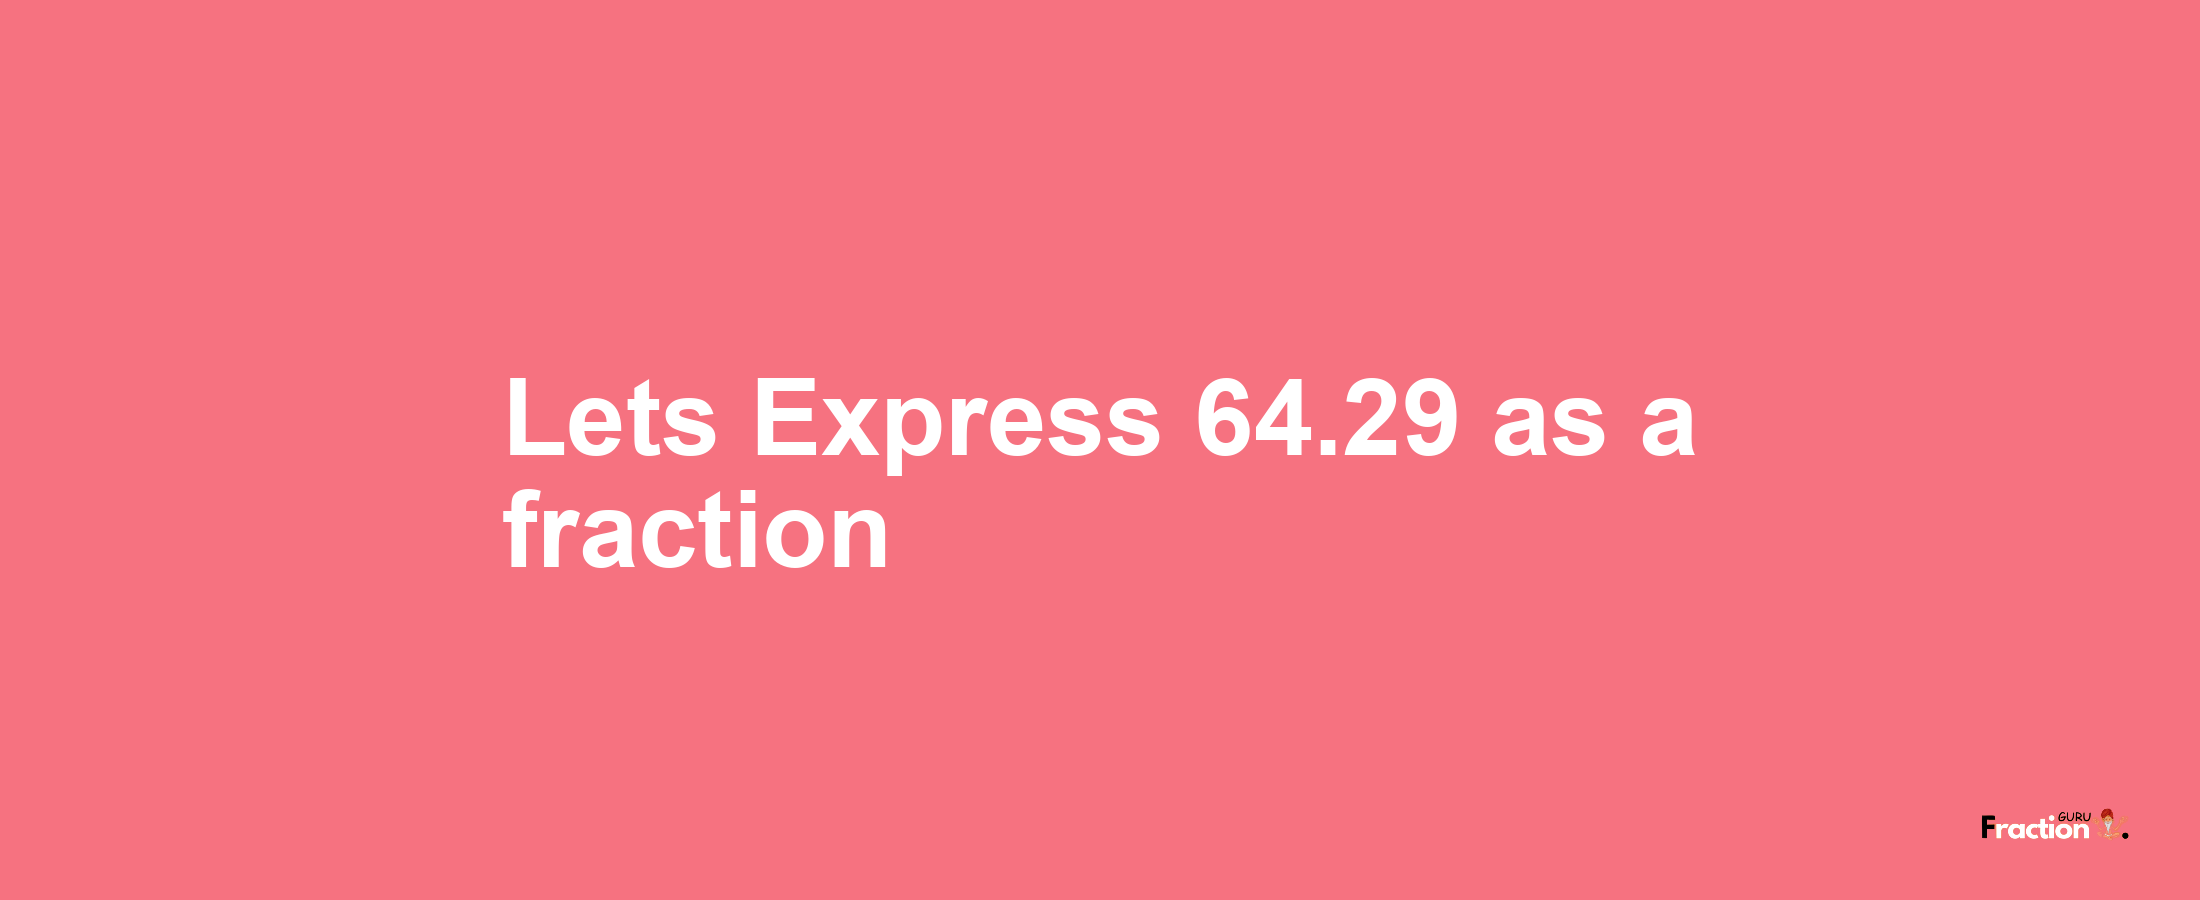 Lets Express 64.29 as afraction